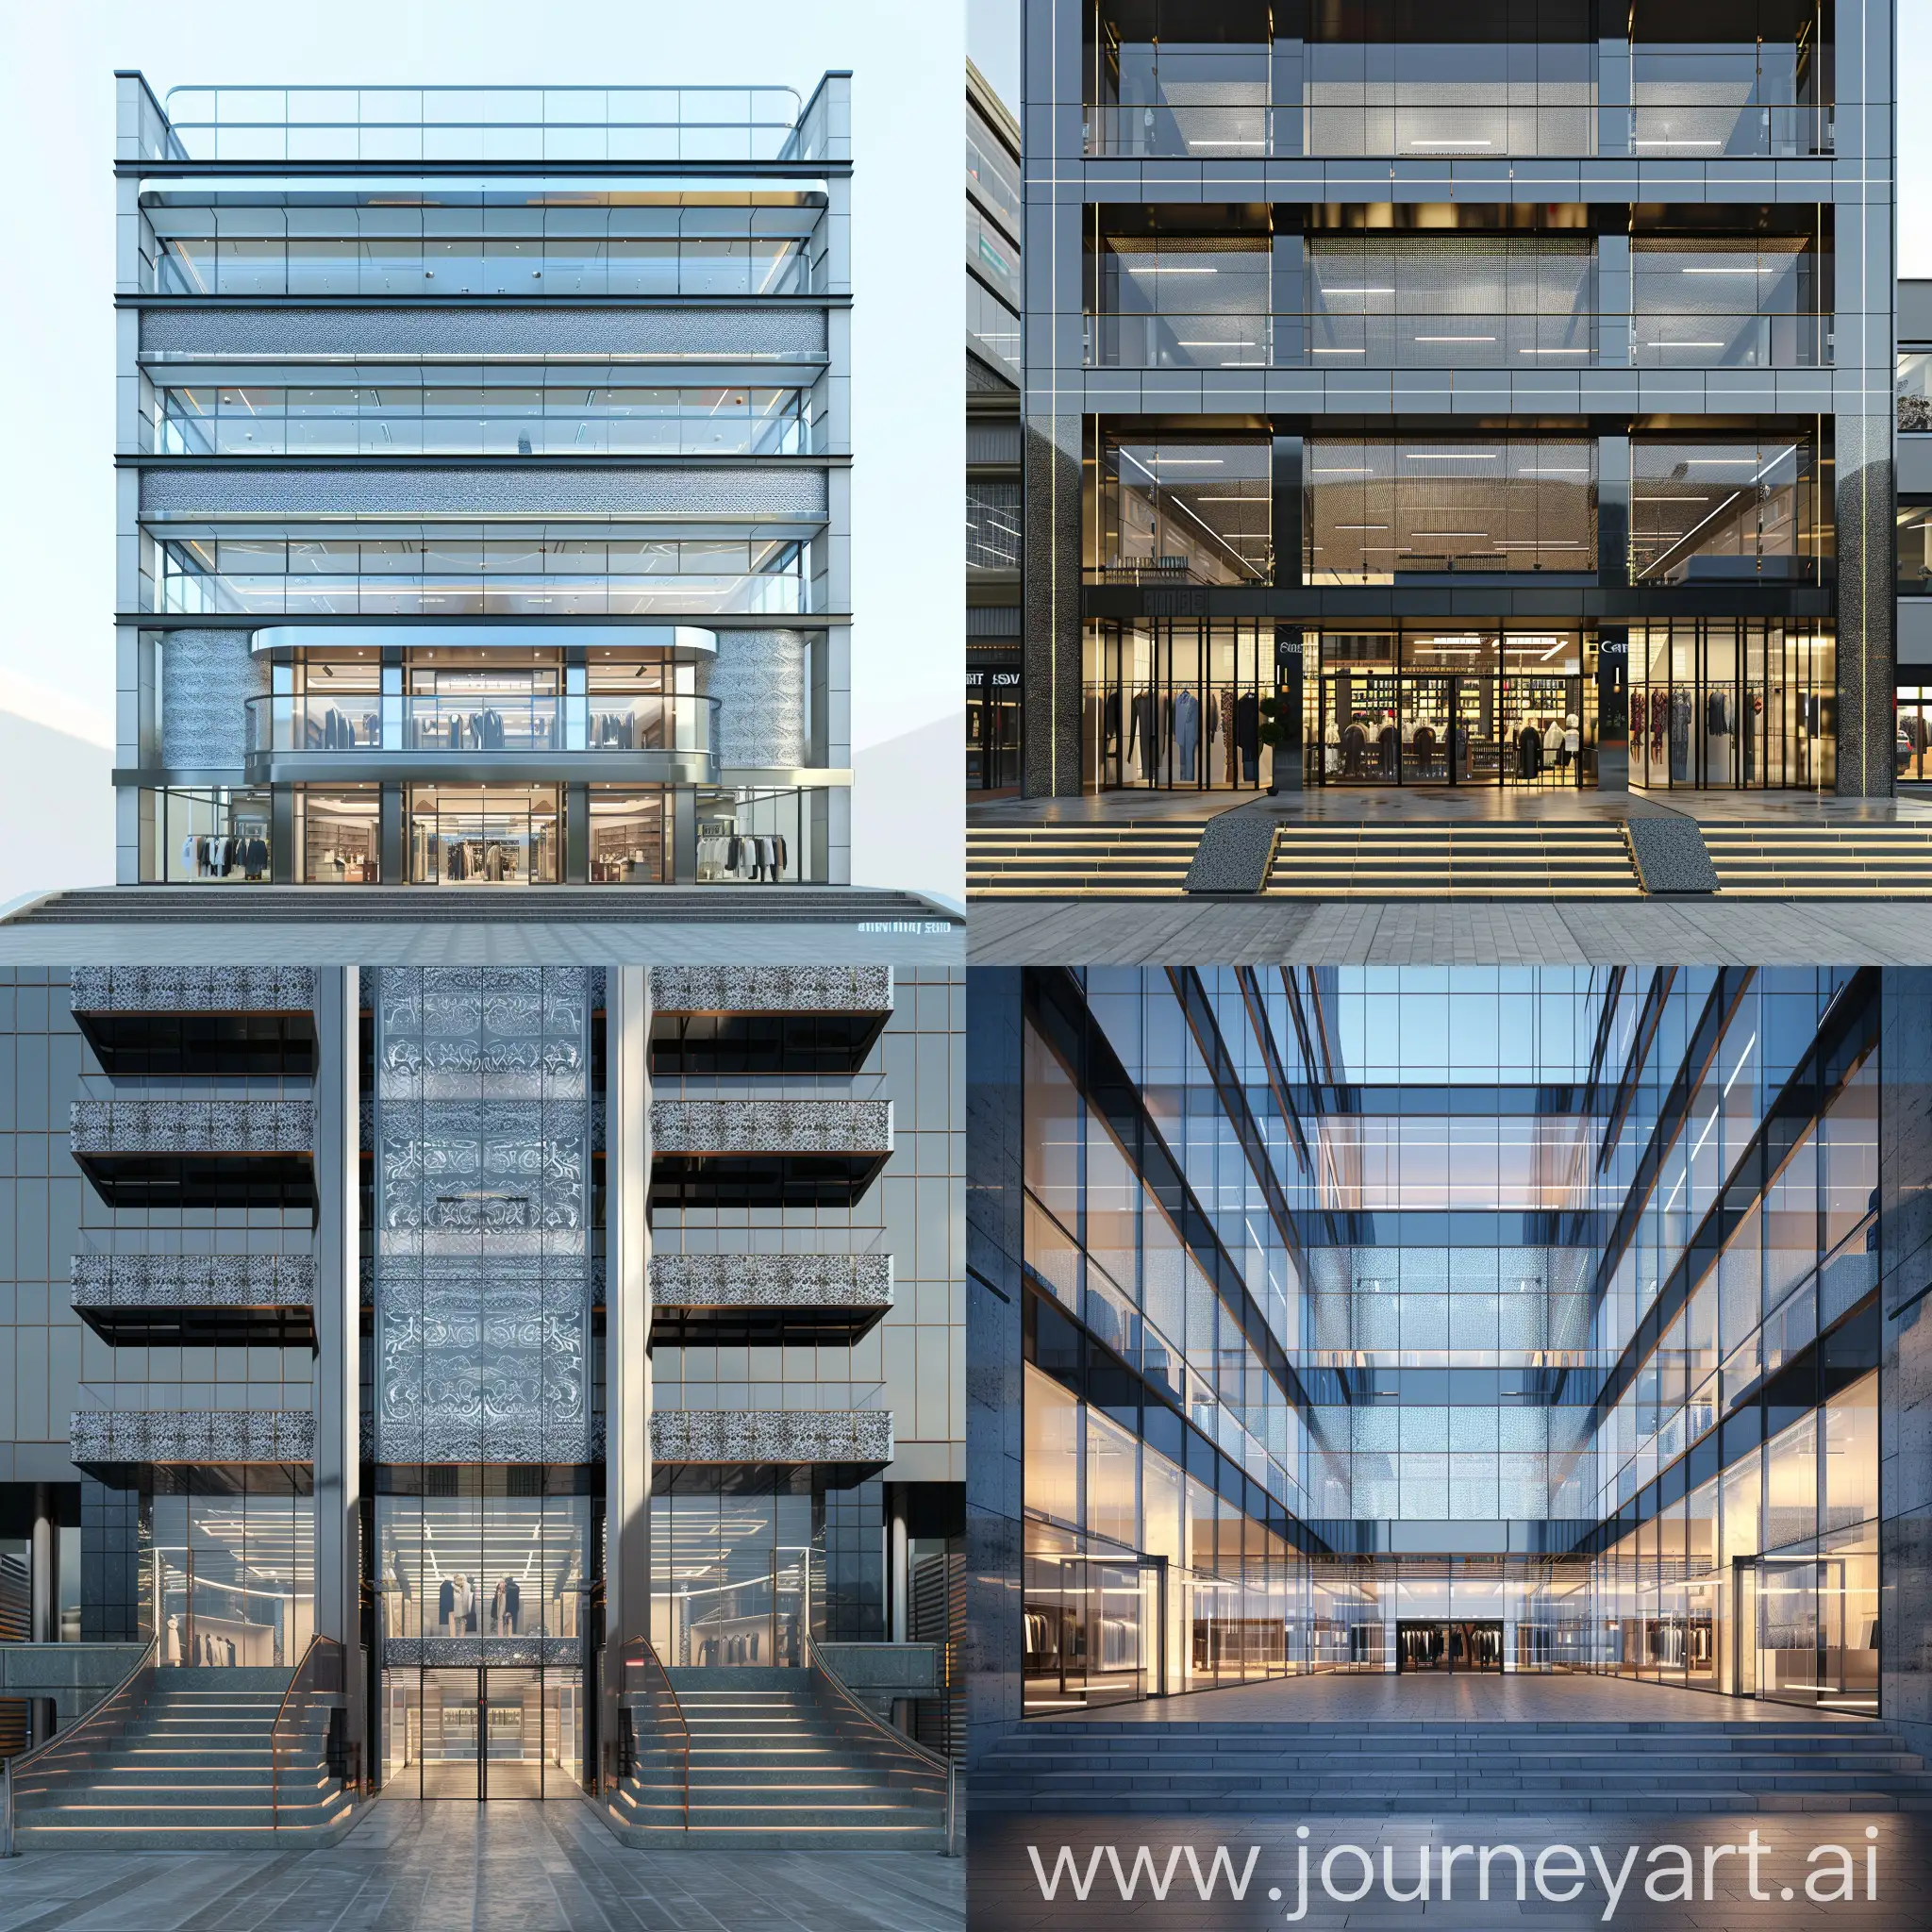 photorealistic ,canon 5D, 7-story office building, with the ground floor being 124 centimeters above ground level and accessible by 6 steps. It has entrance glass facades on both sides and a commercial clothing store in the middle of these entrances. I intend to design a modern glass facade for this building, with a second layer made of metal. I have a specific pattern and design in mind for the metal layer to enhance the beauty and grandeur of the building,so that this idea can be transformed into a realistic image.